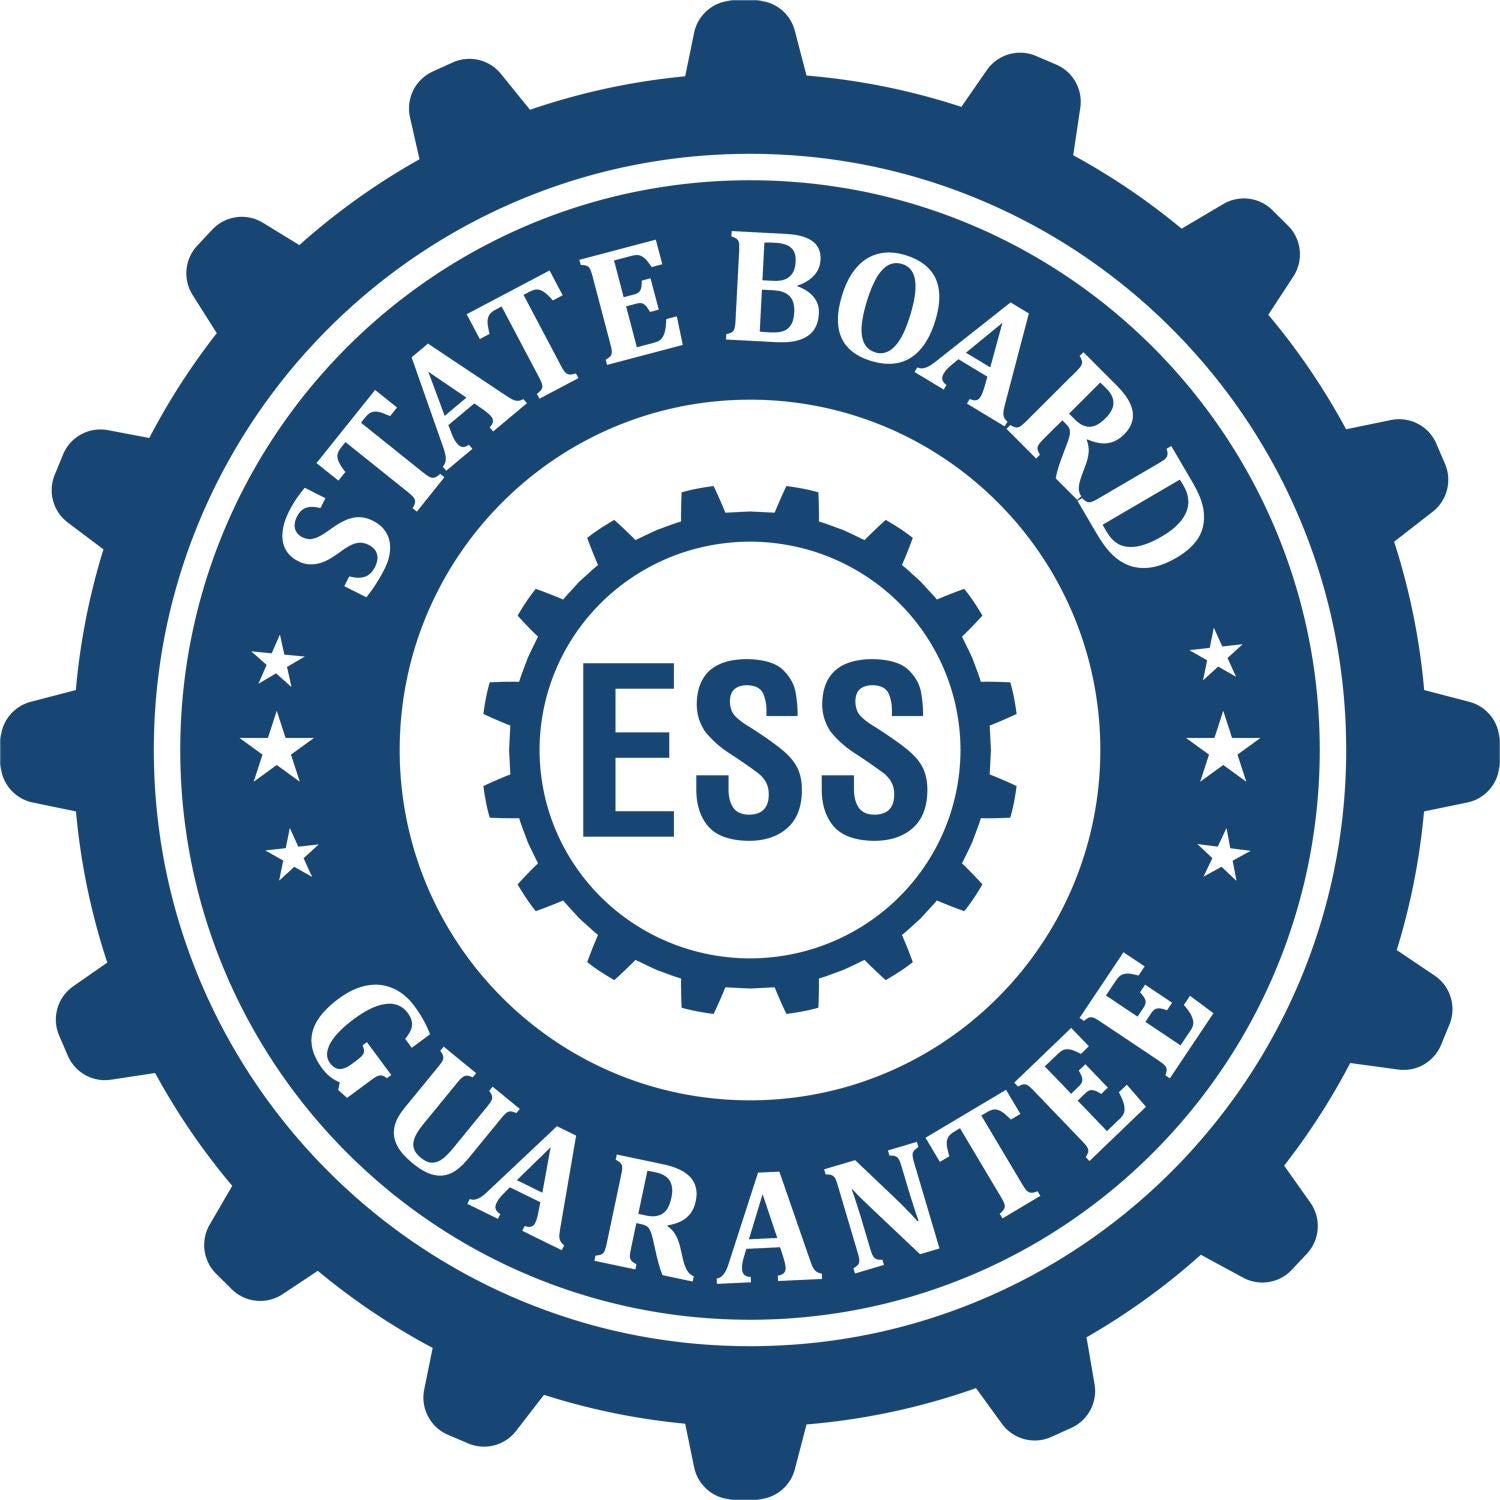 An emblem in a gear shape illustrating a state board guarantee for the New Mexico Professional Engineer Seal Stamp product.